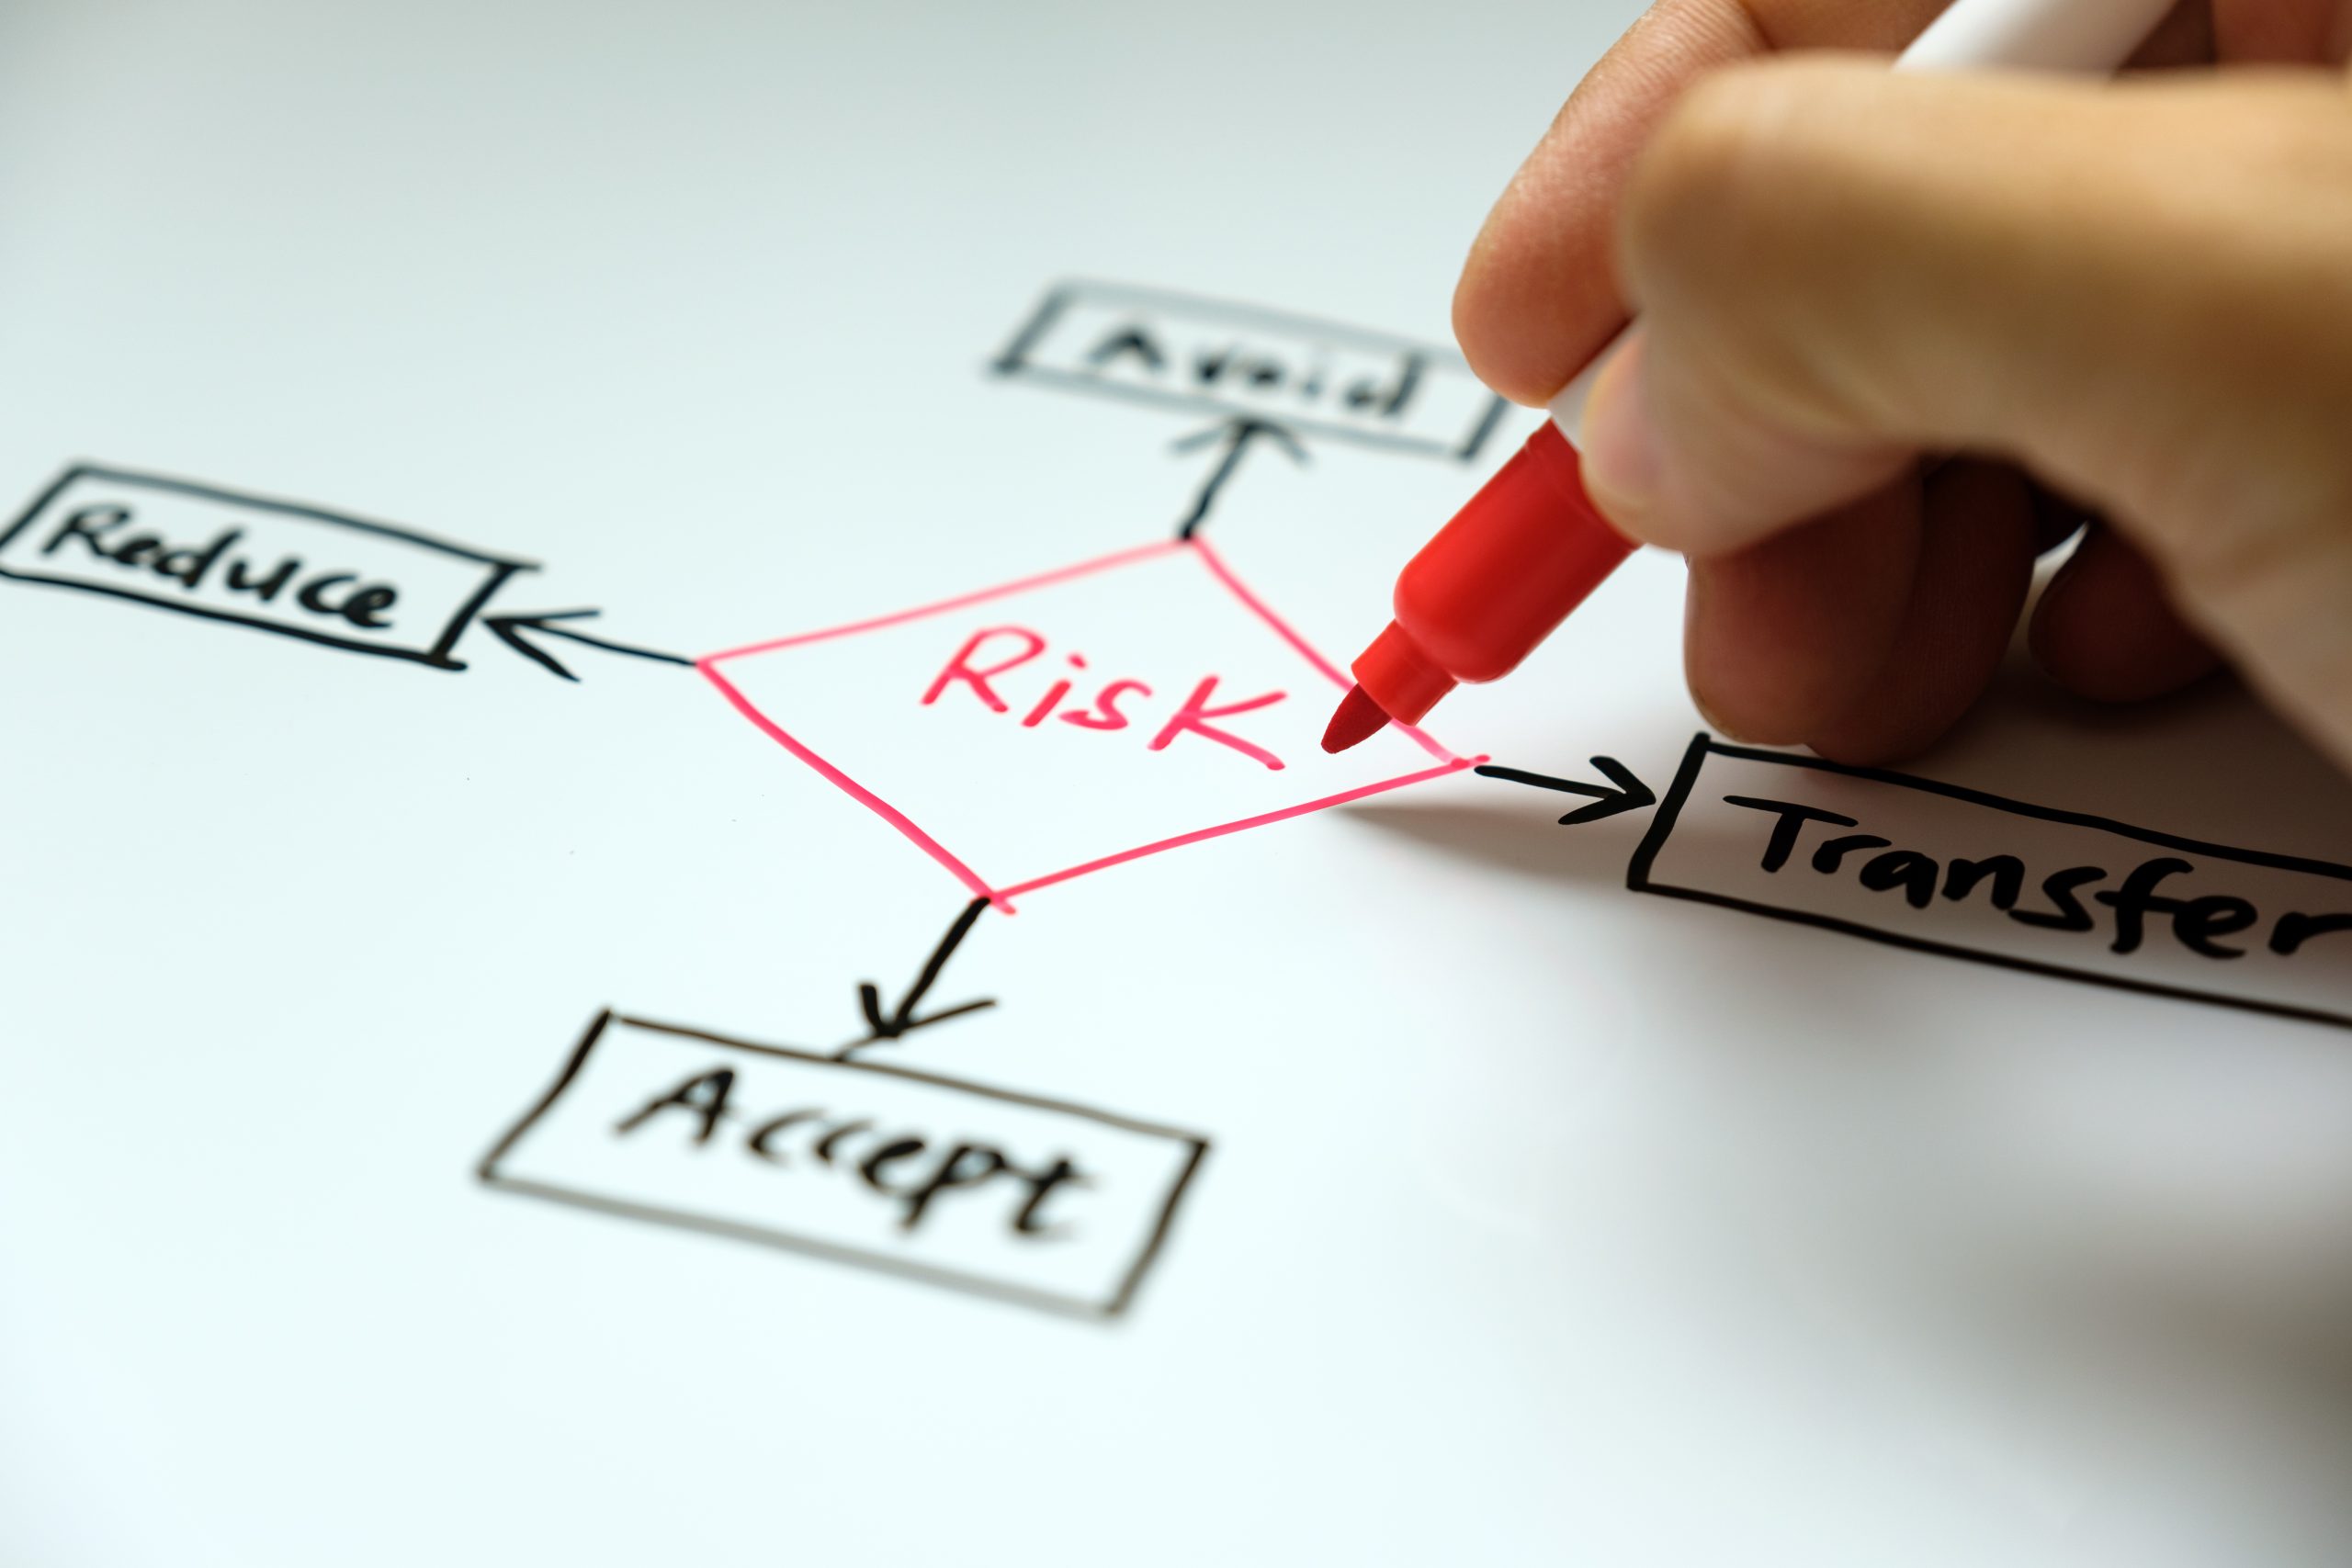 How we manage project risks: 4 steps and 5 tips